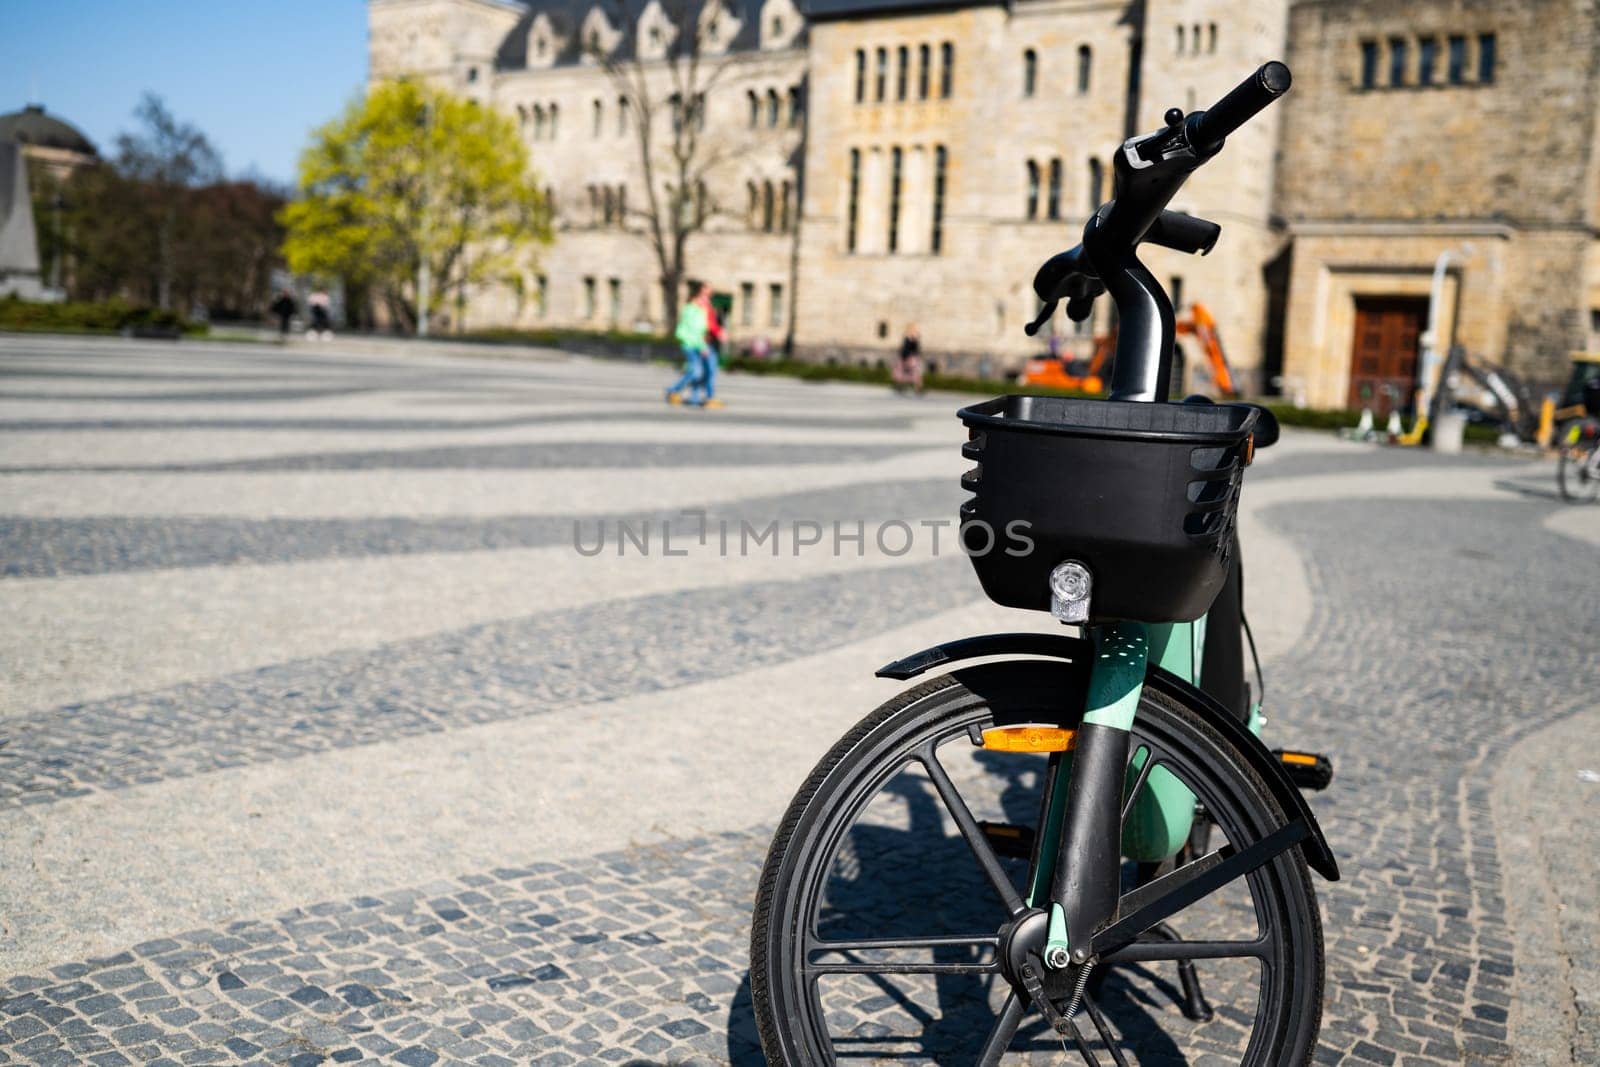 Electric City Bike For Rent Offers Sightseen Observation On City Streets